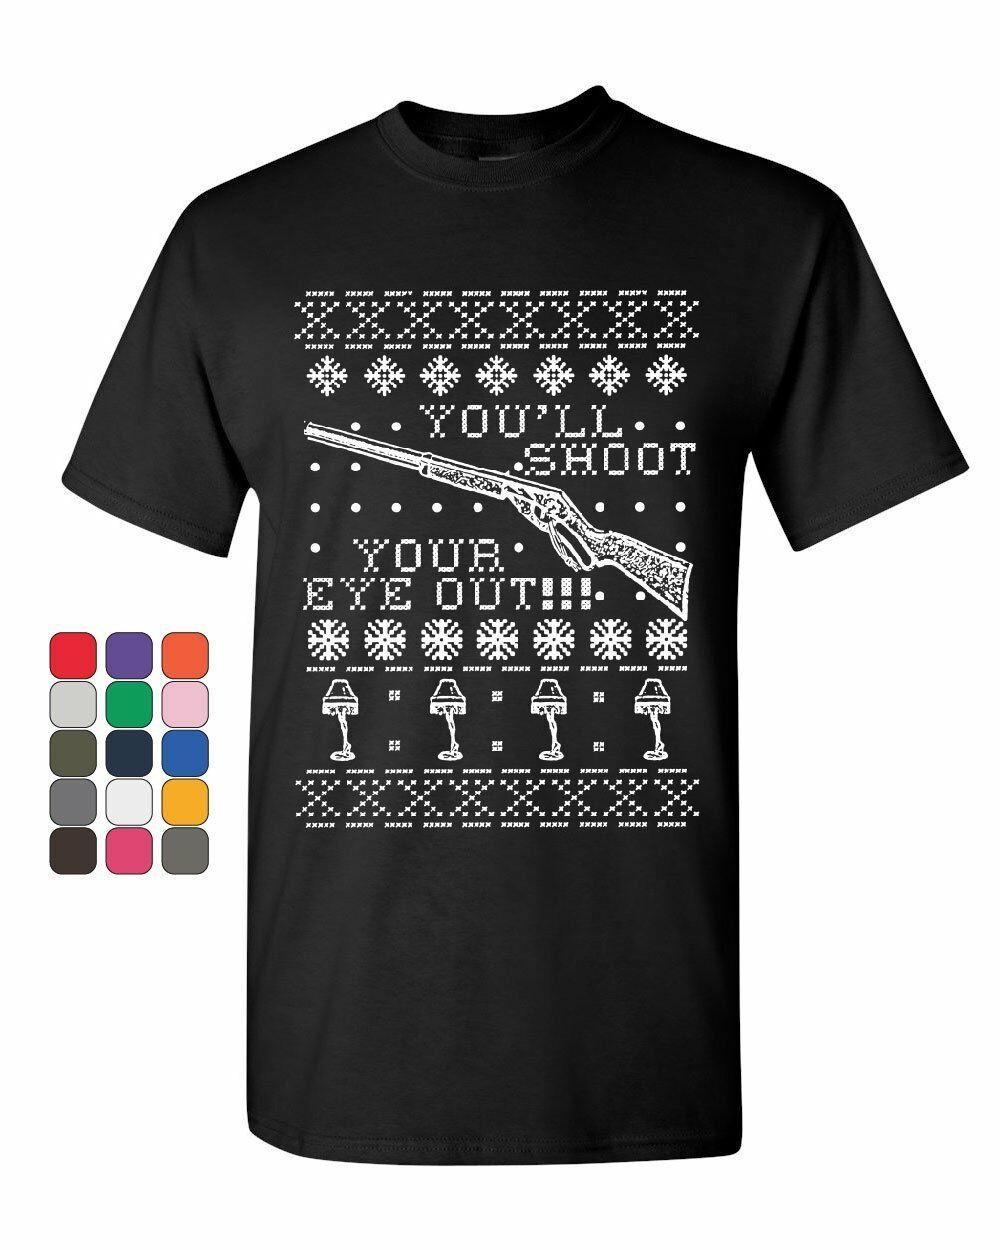 You'll Shoot Your Eye Out T-Shirt Funny Christmas Ugly Sweater Xmas